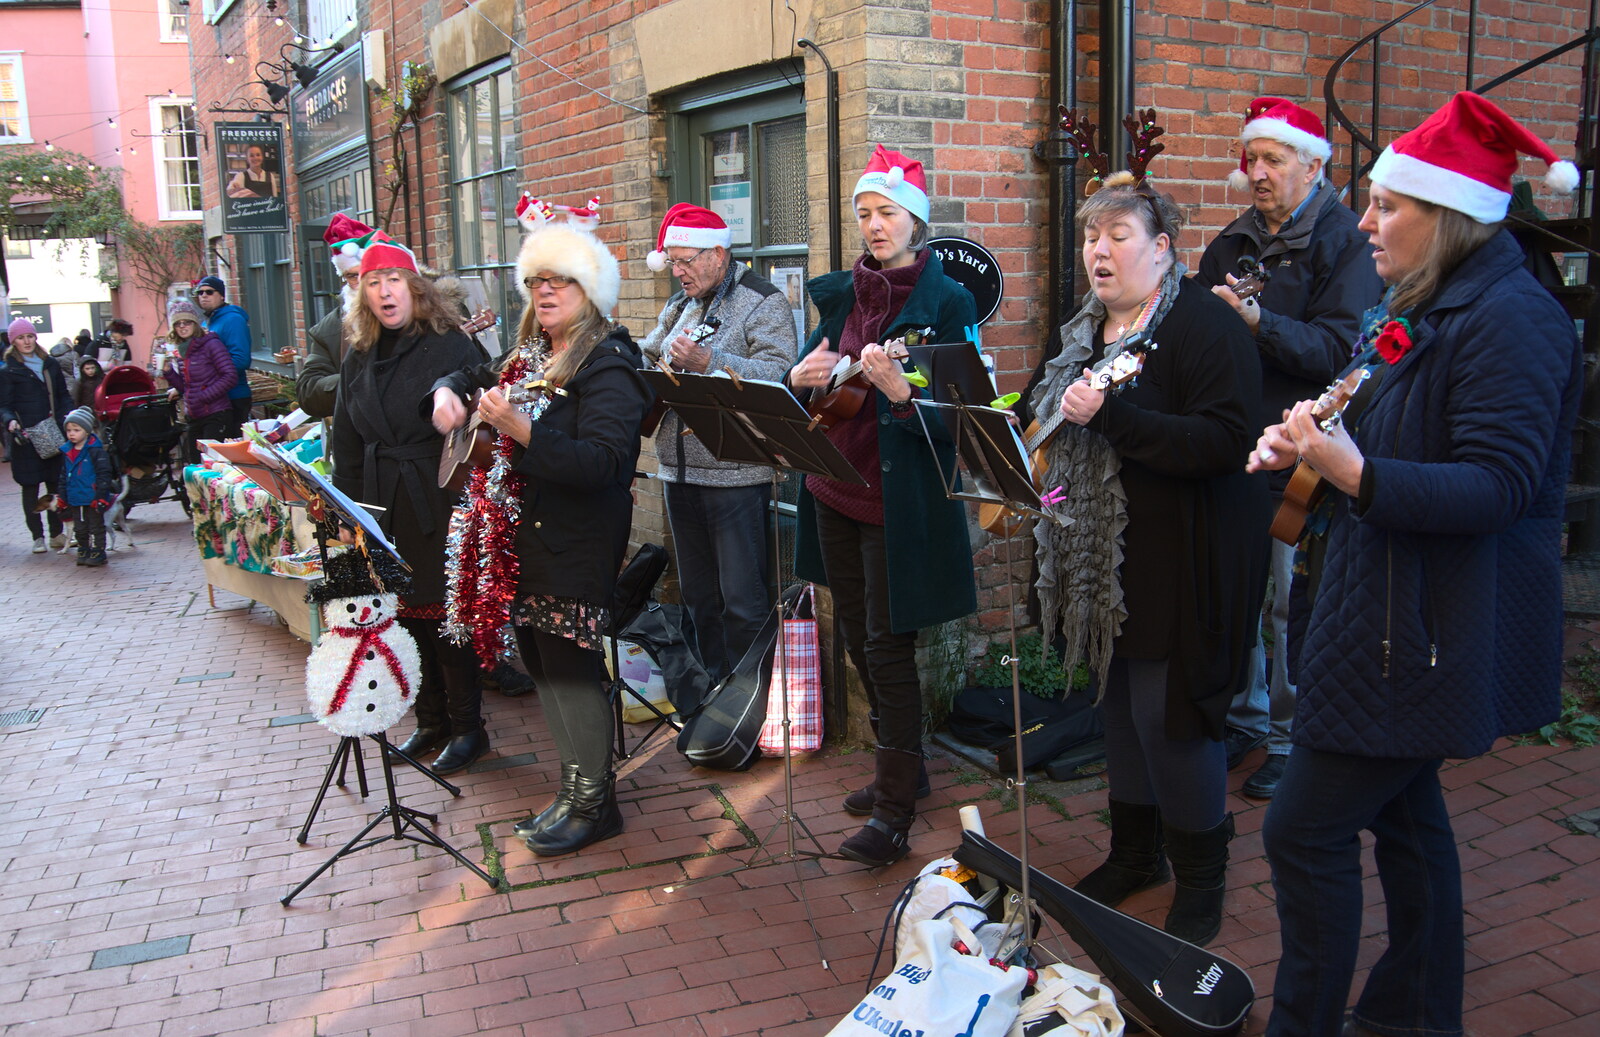 There's now a ukulele band doing its thing from The St. Nicholas Street Fayre, Diss, Norfolk - 9th December 2018